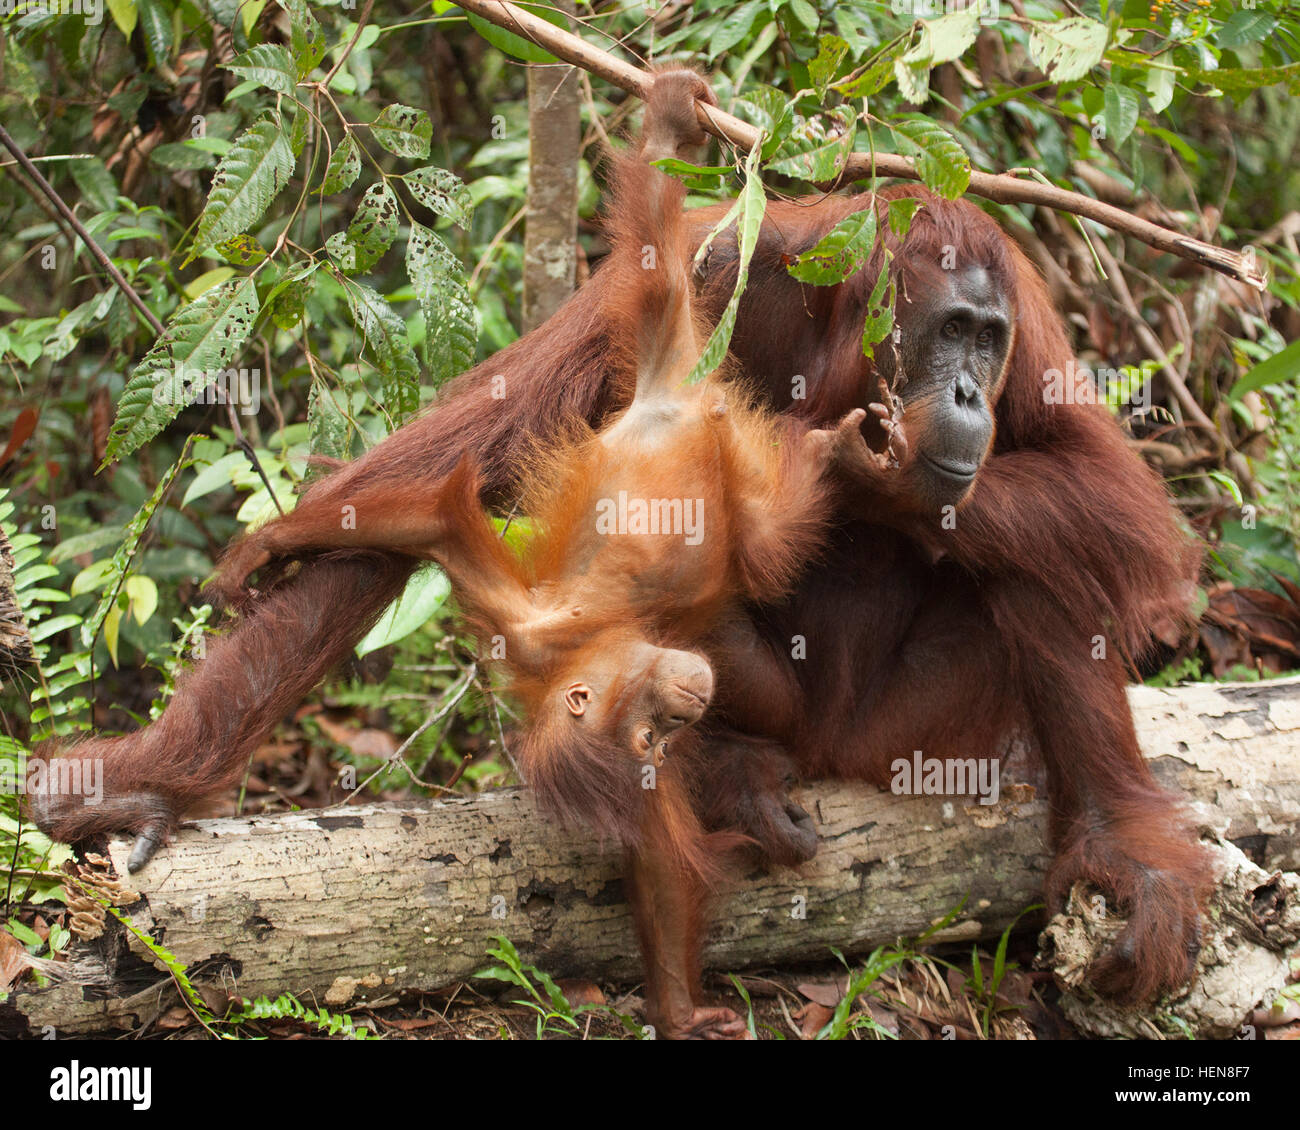 Wild Bornean Orangutan (Pongo pygmaeus) baby playing with mother while hanging from tree branch in Borneo Stock Photo